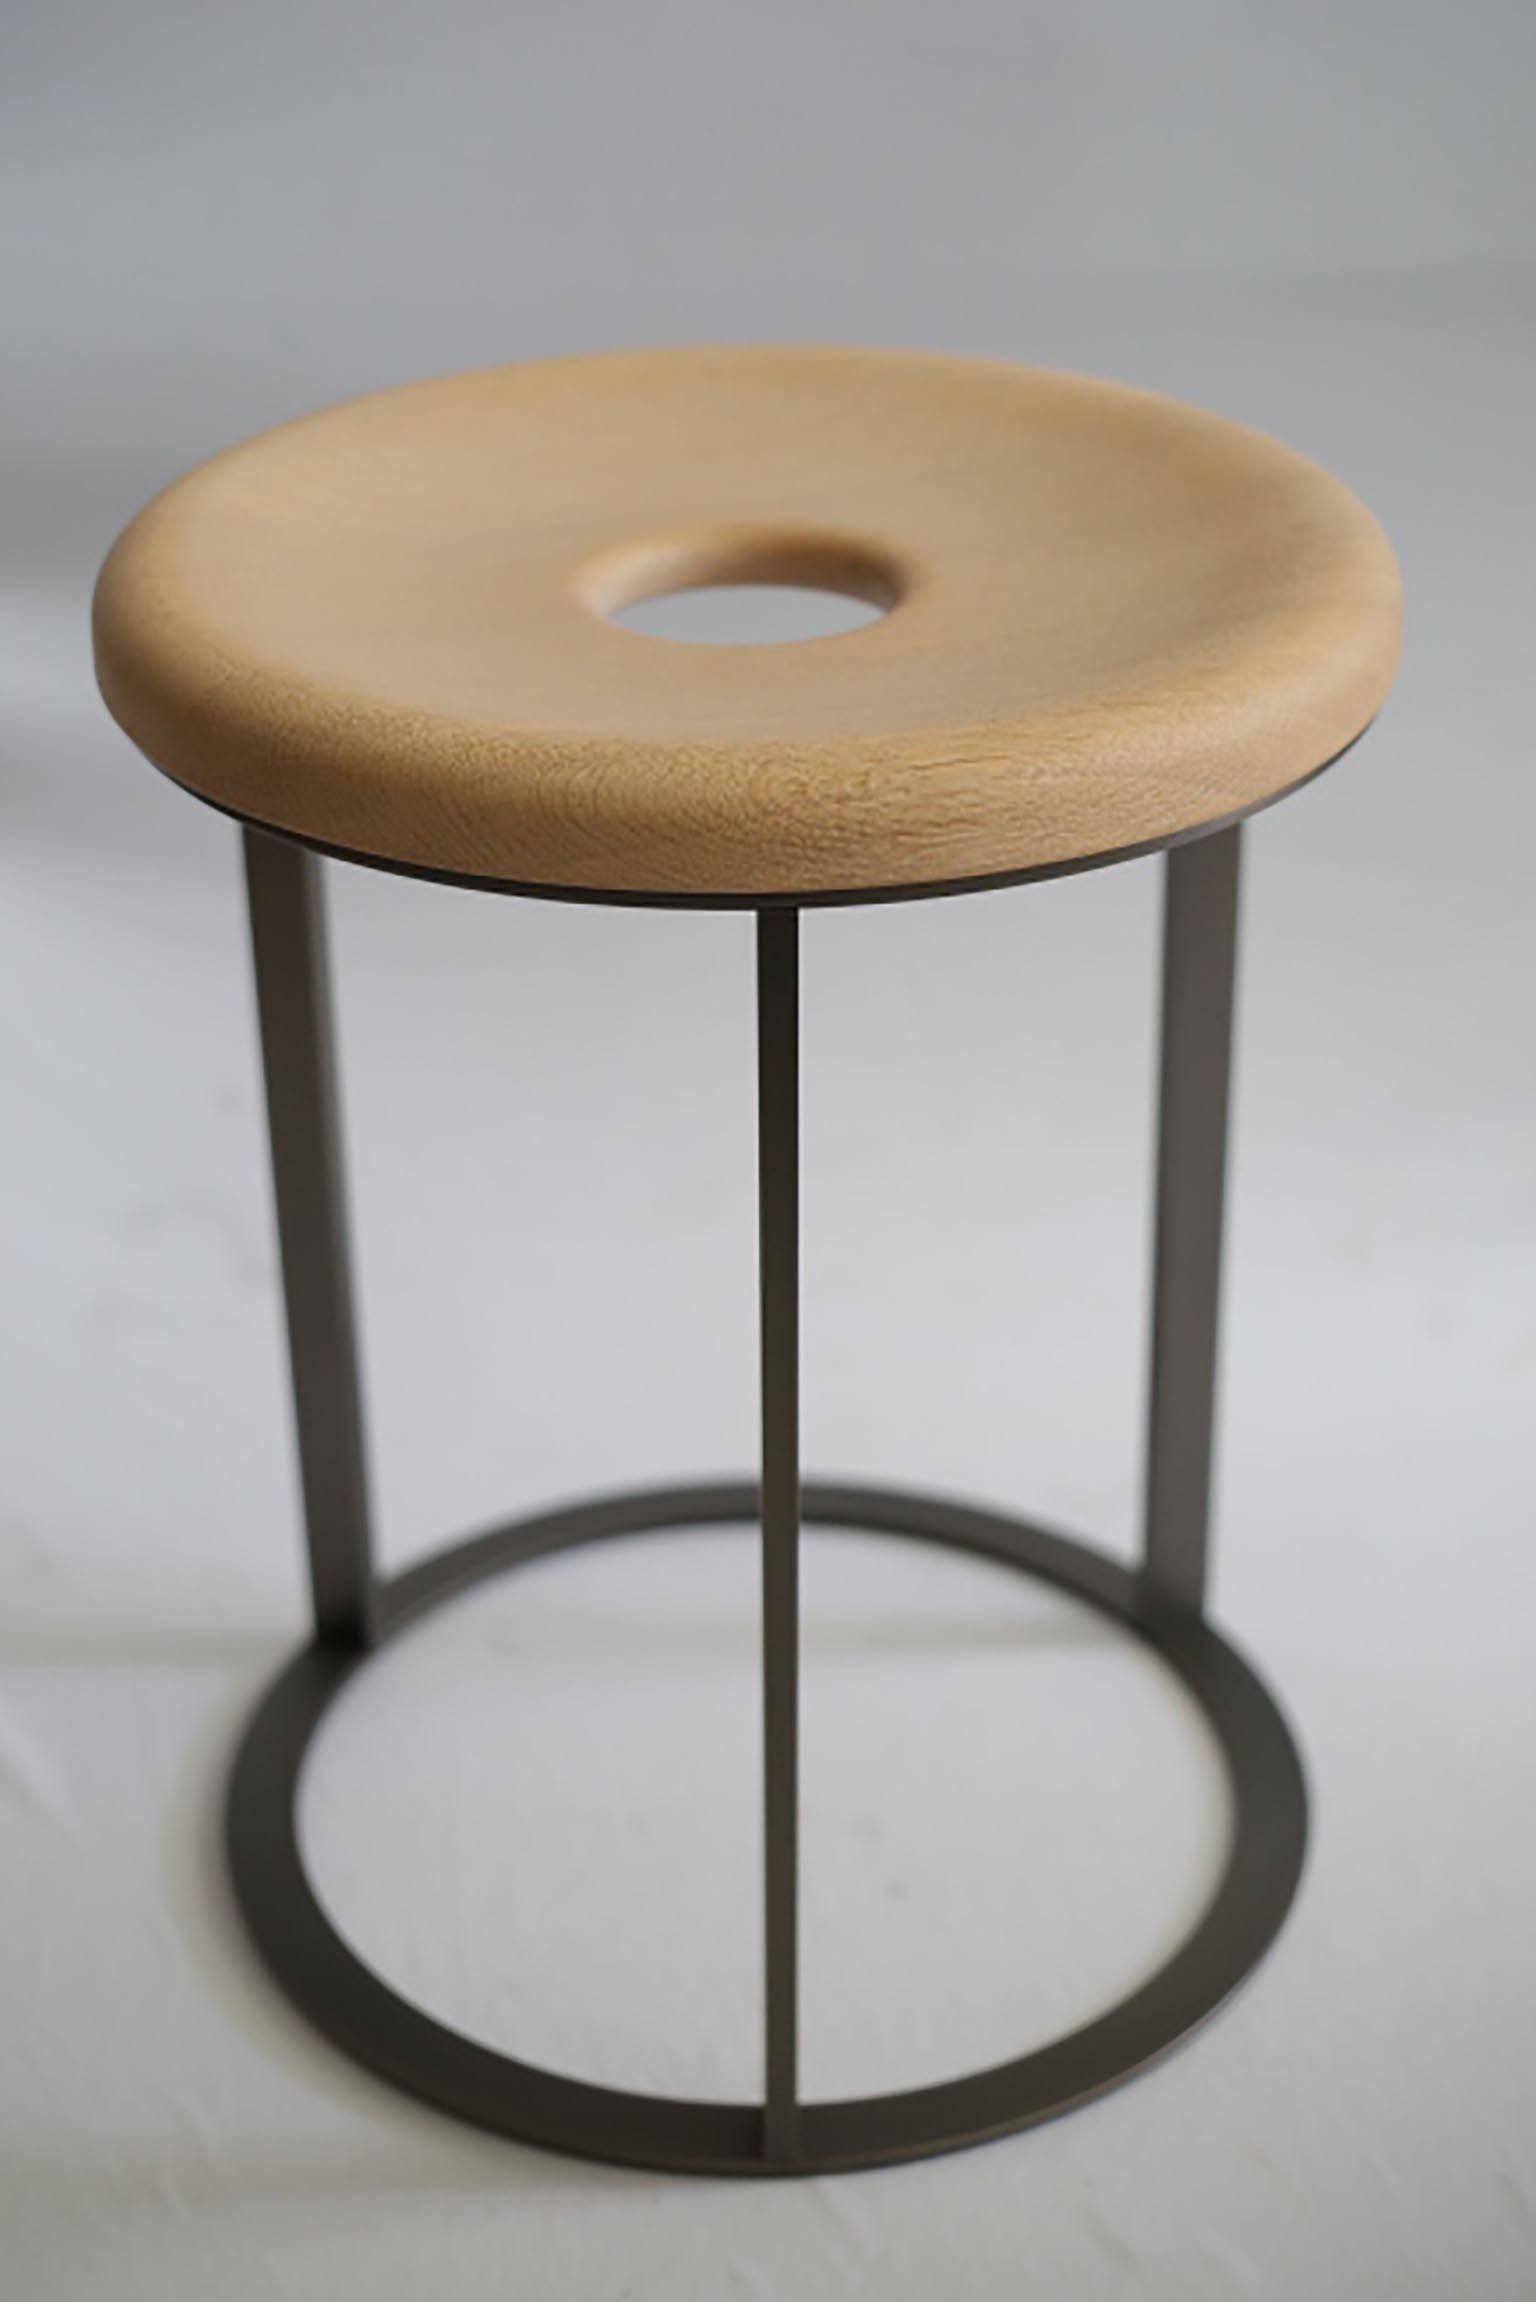 Round wood and metal side table or stool made in Italy.